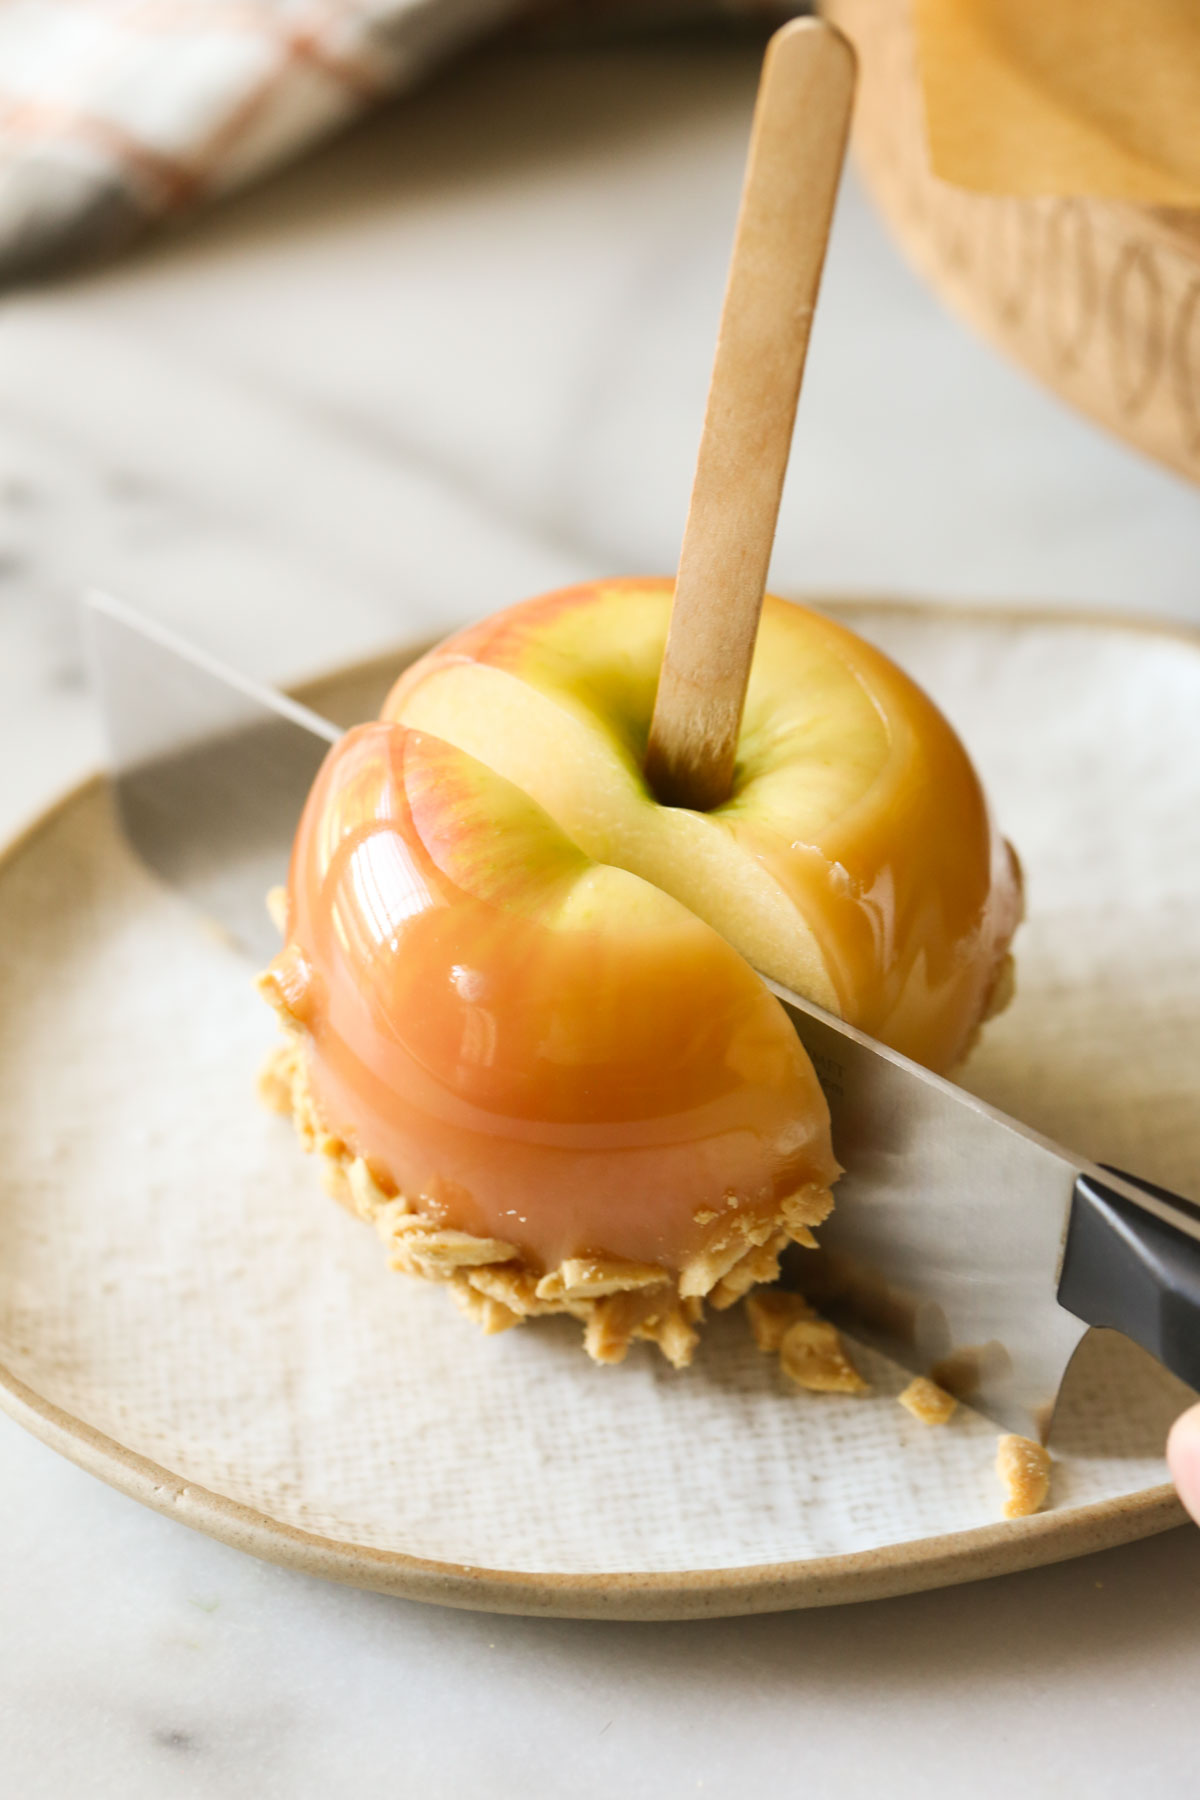 A Homemade Caramel Apple on a plate being sliced with a knife.  